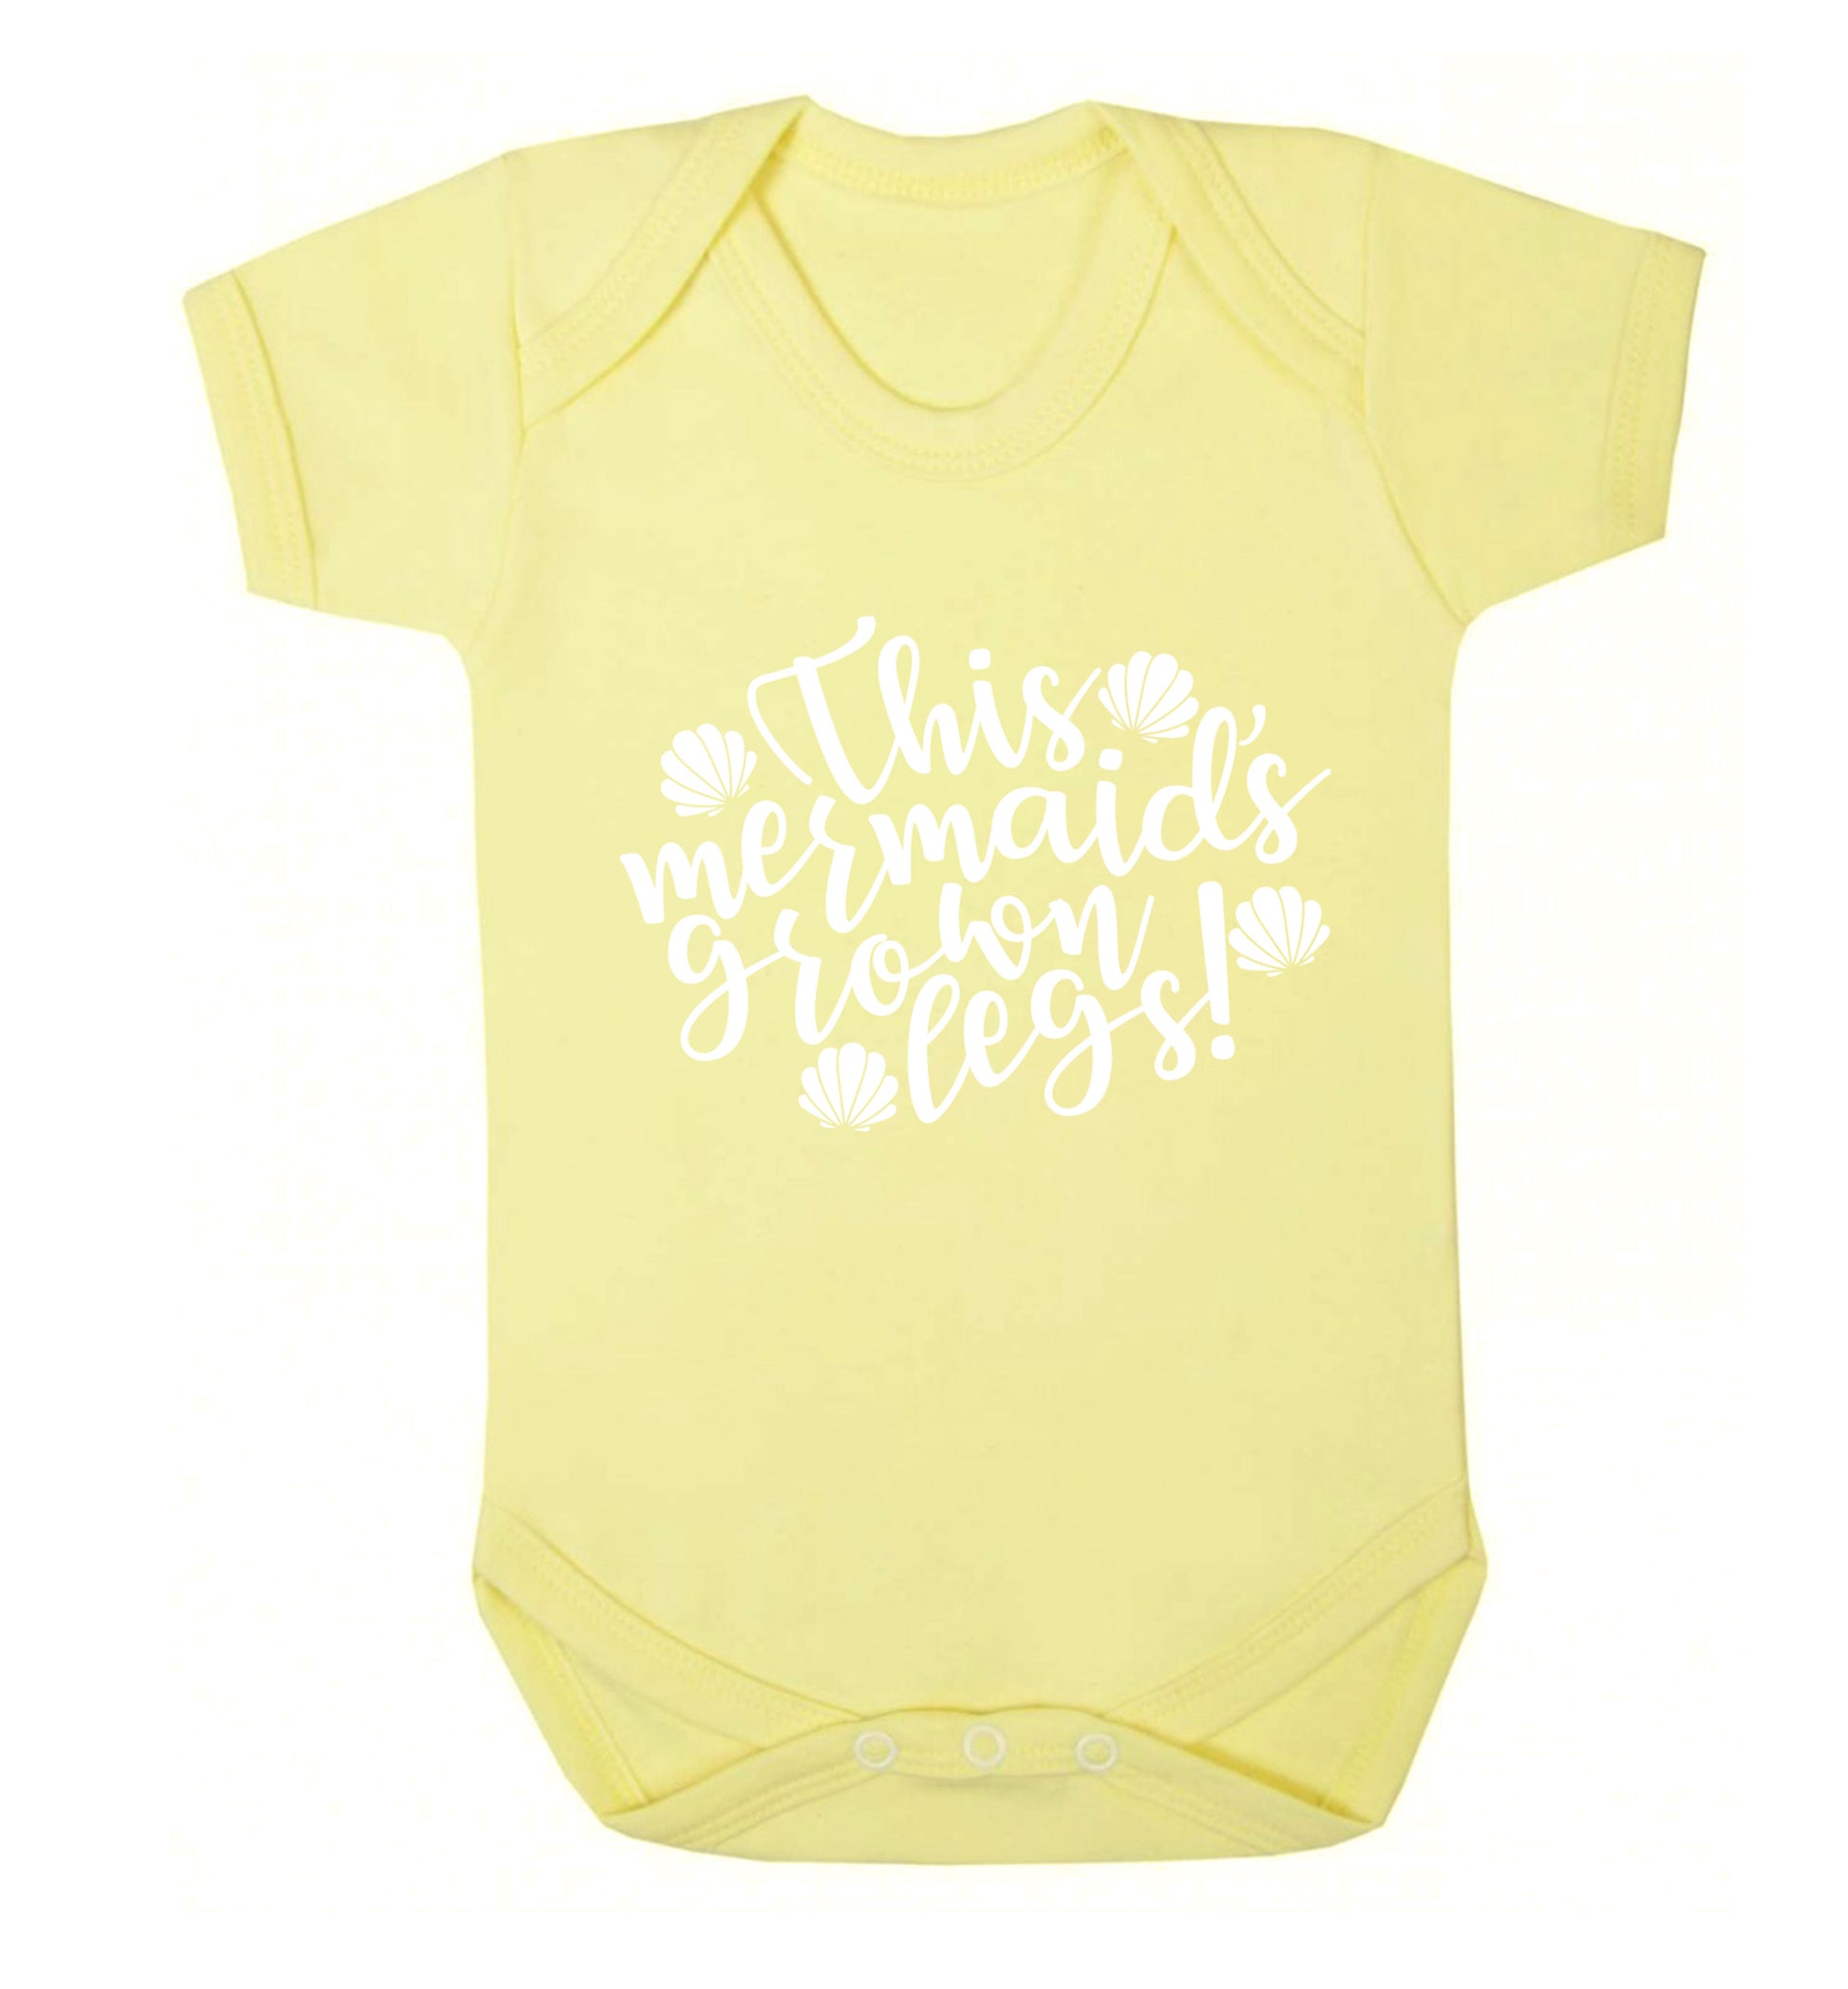 This mermaid's grown legs! Baby Vest pale yellow 18-24 months